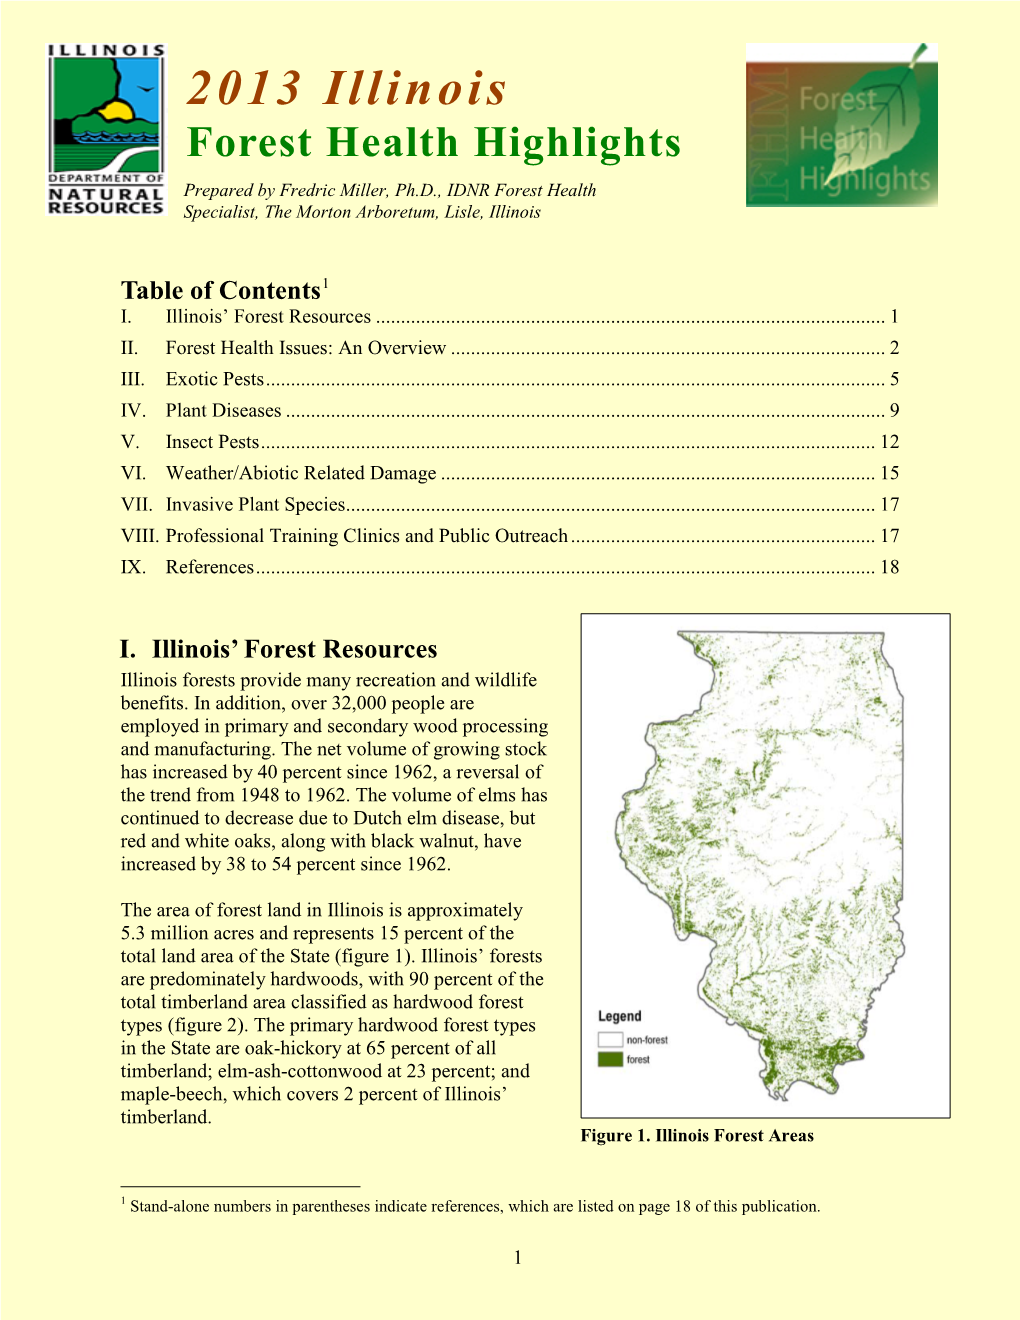 2013 Forest Health Highlights